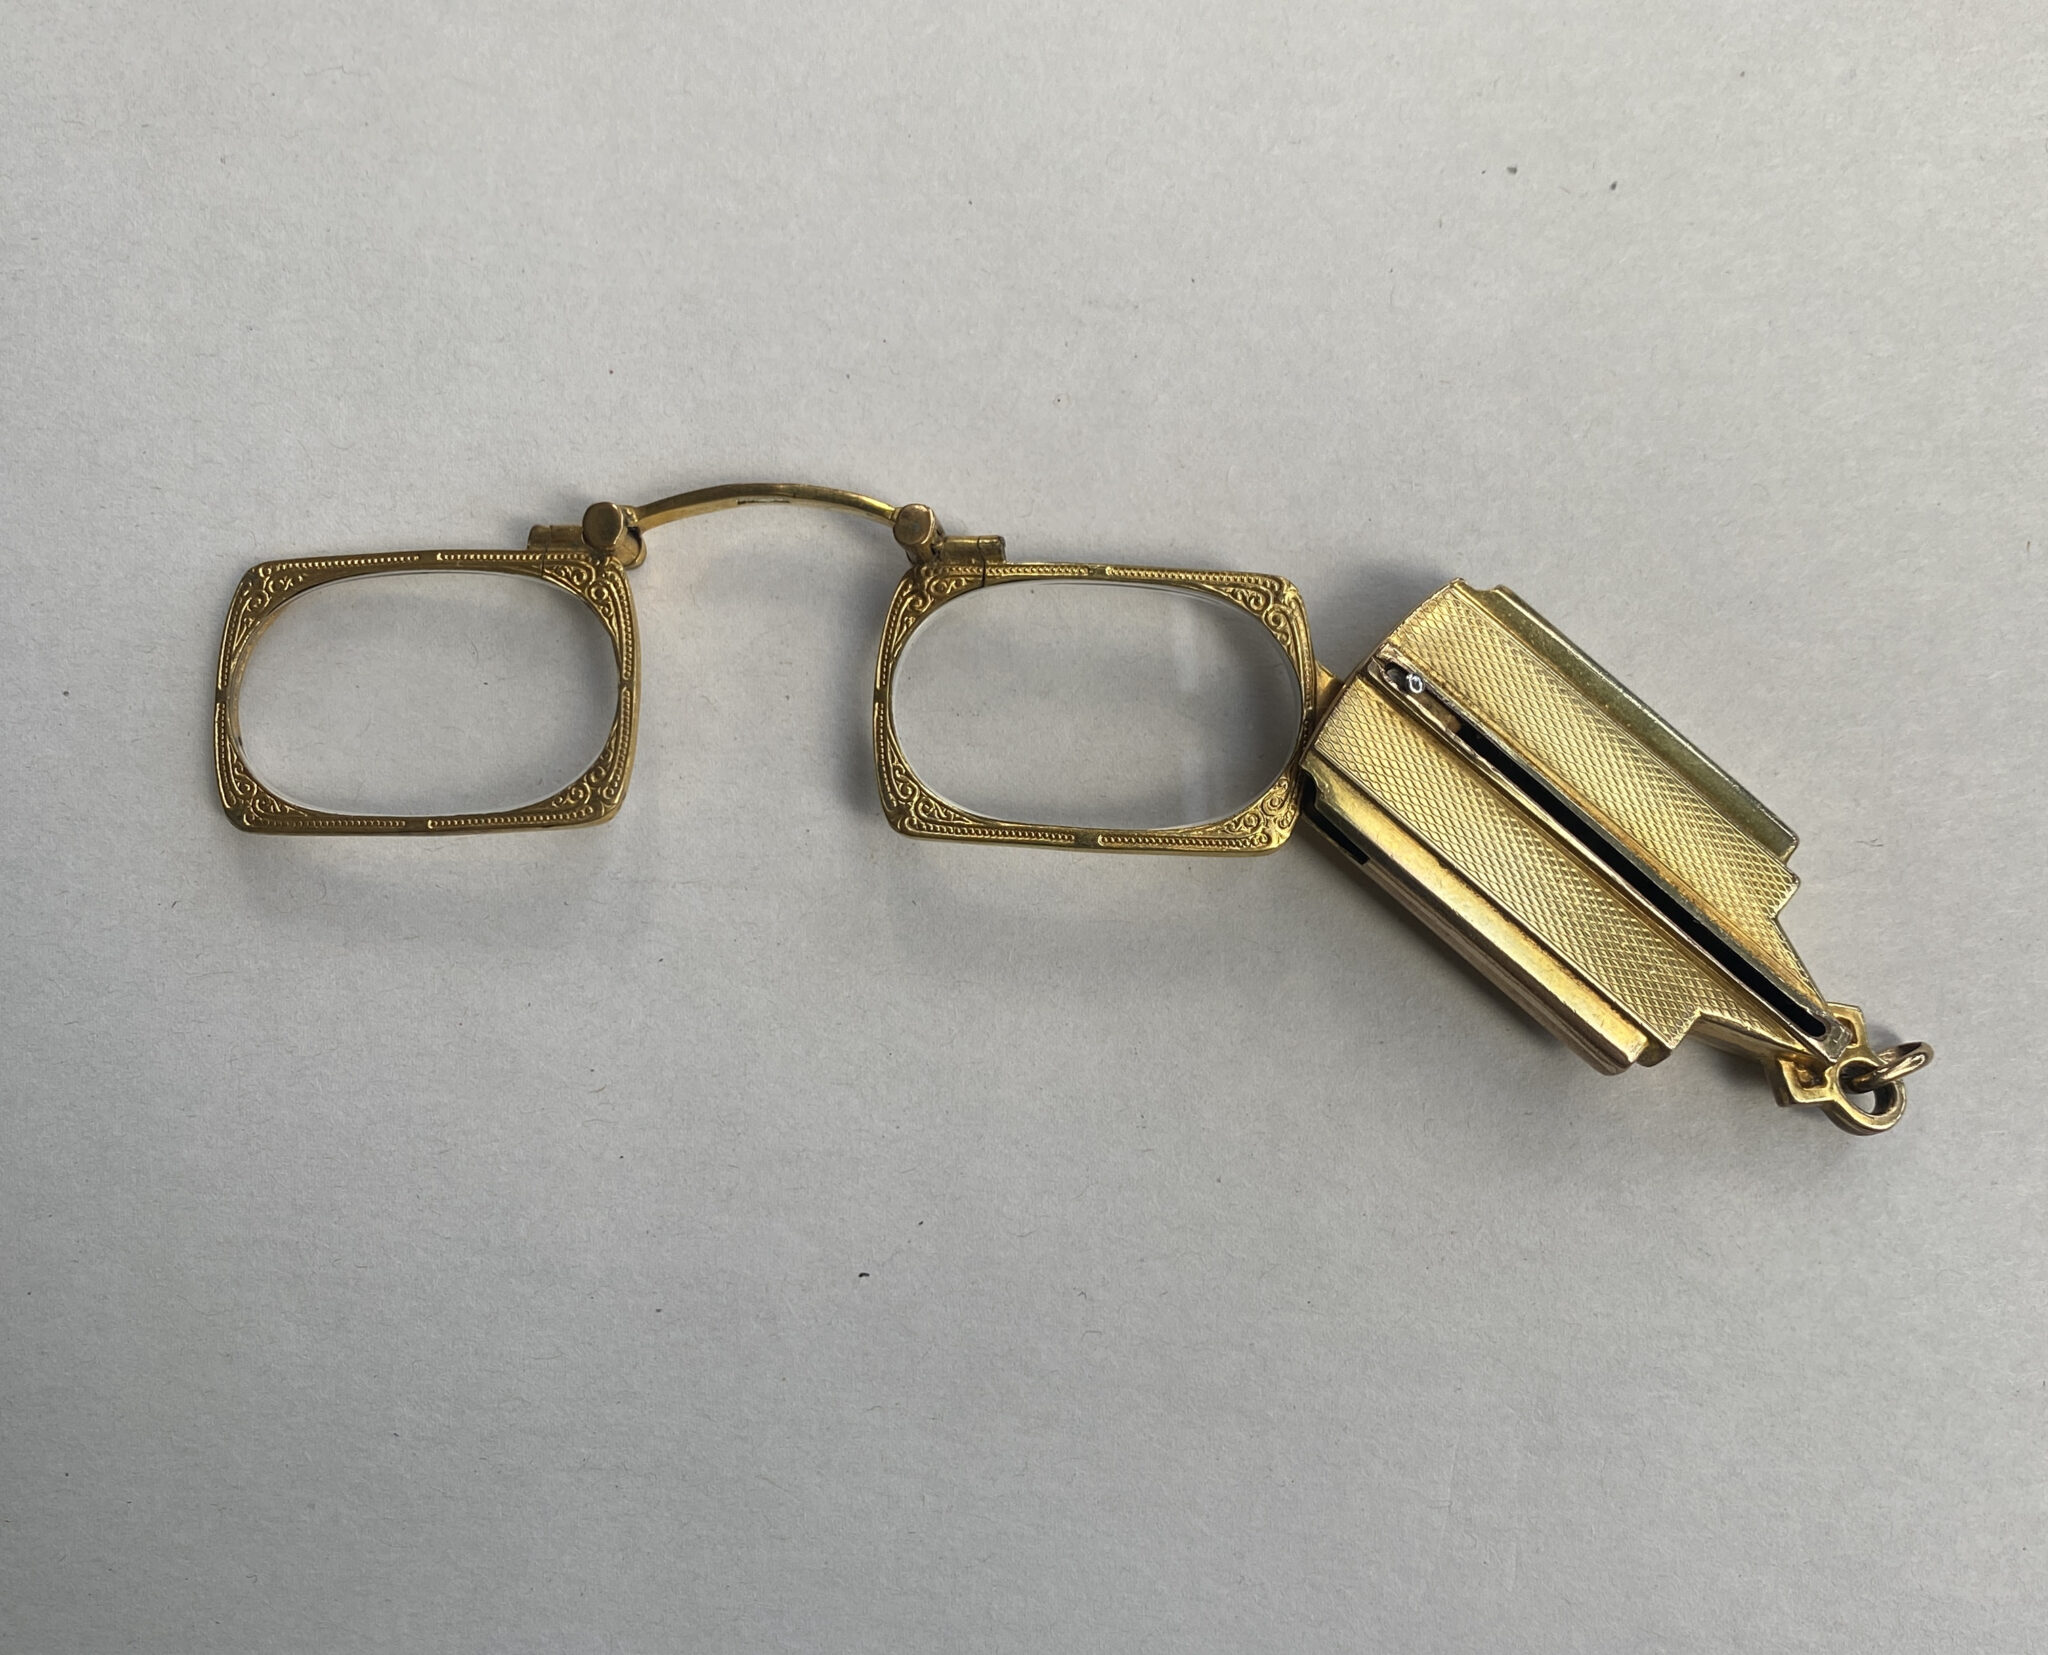 Unusual gold-plated collapsing lorgnettes.